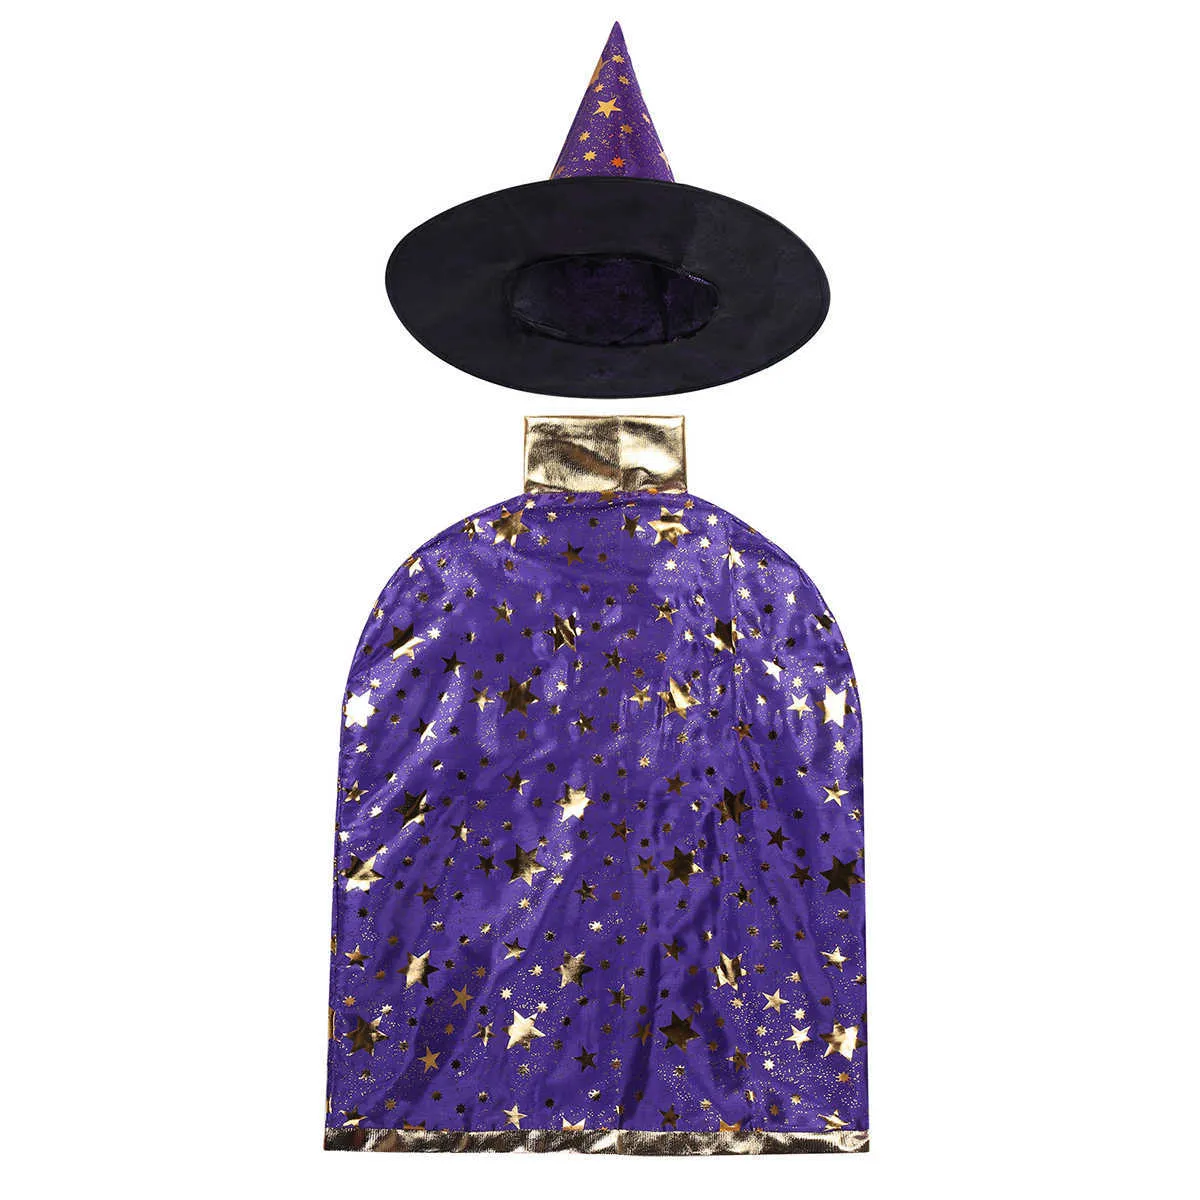 Bambini Halloween Costume Witch Wizard Wizard mantello Capo con cappello appuntito Set Anime Cosplay Party Stars Pattern Girls Boys Boys Magician Outfit Q0910